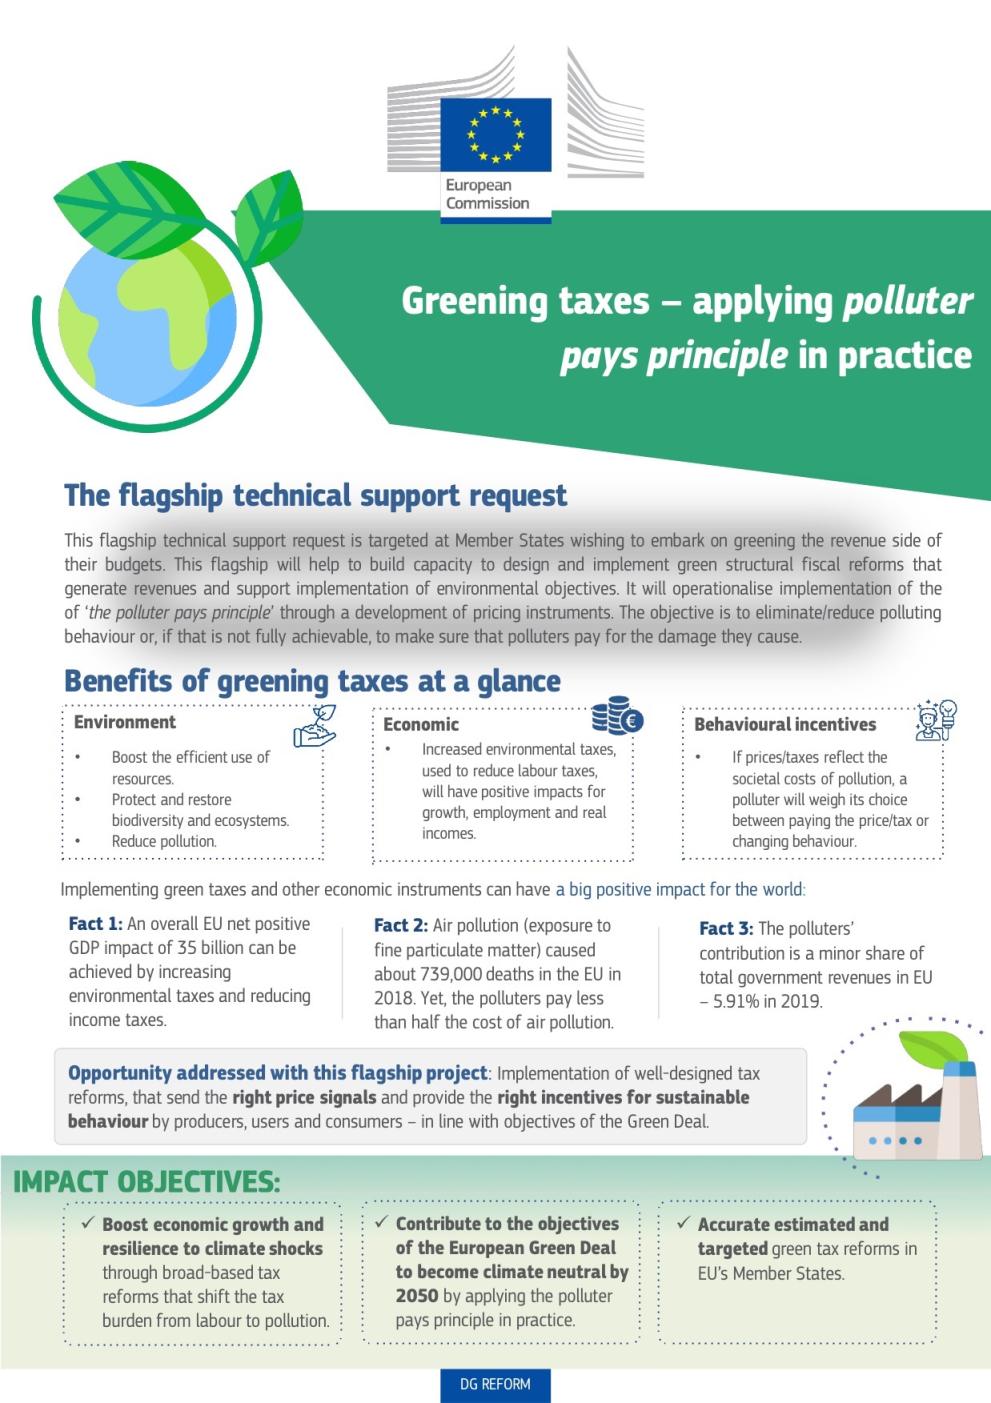 Greening taxes - applying polluter pays principle in practice